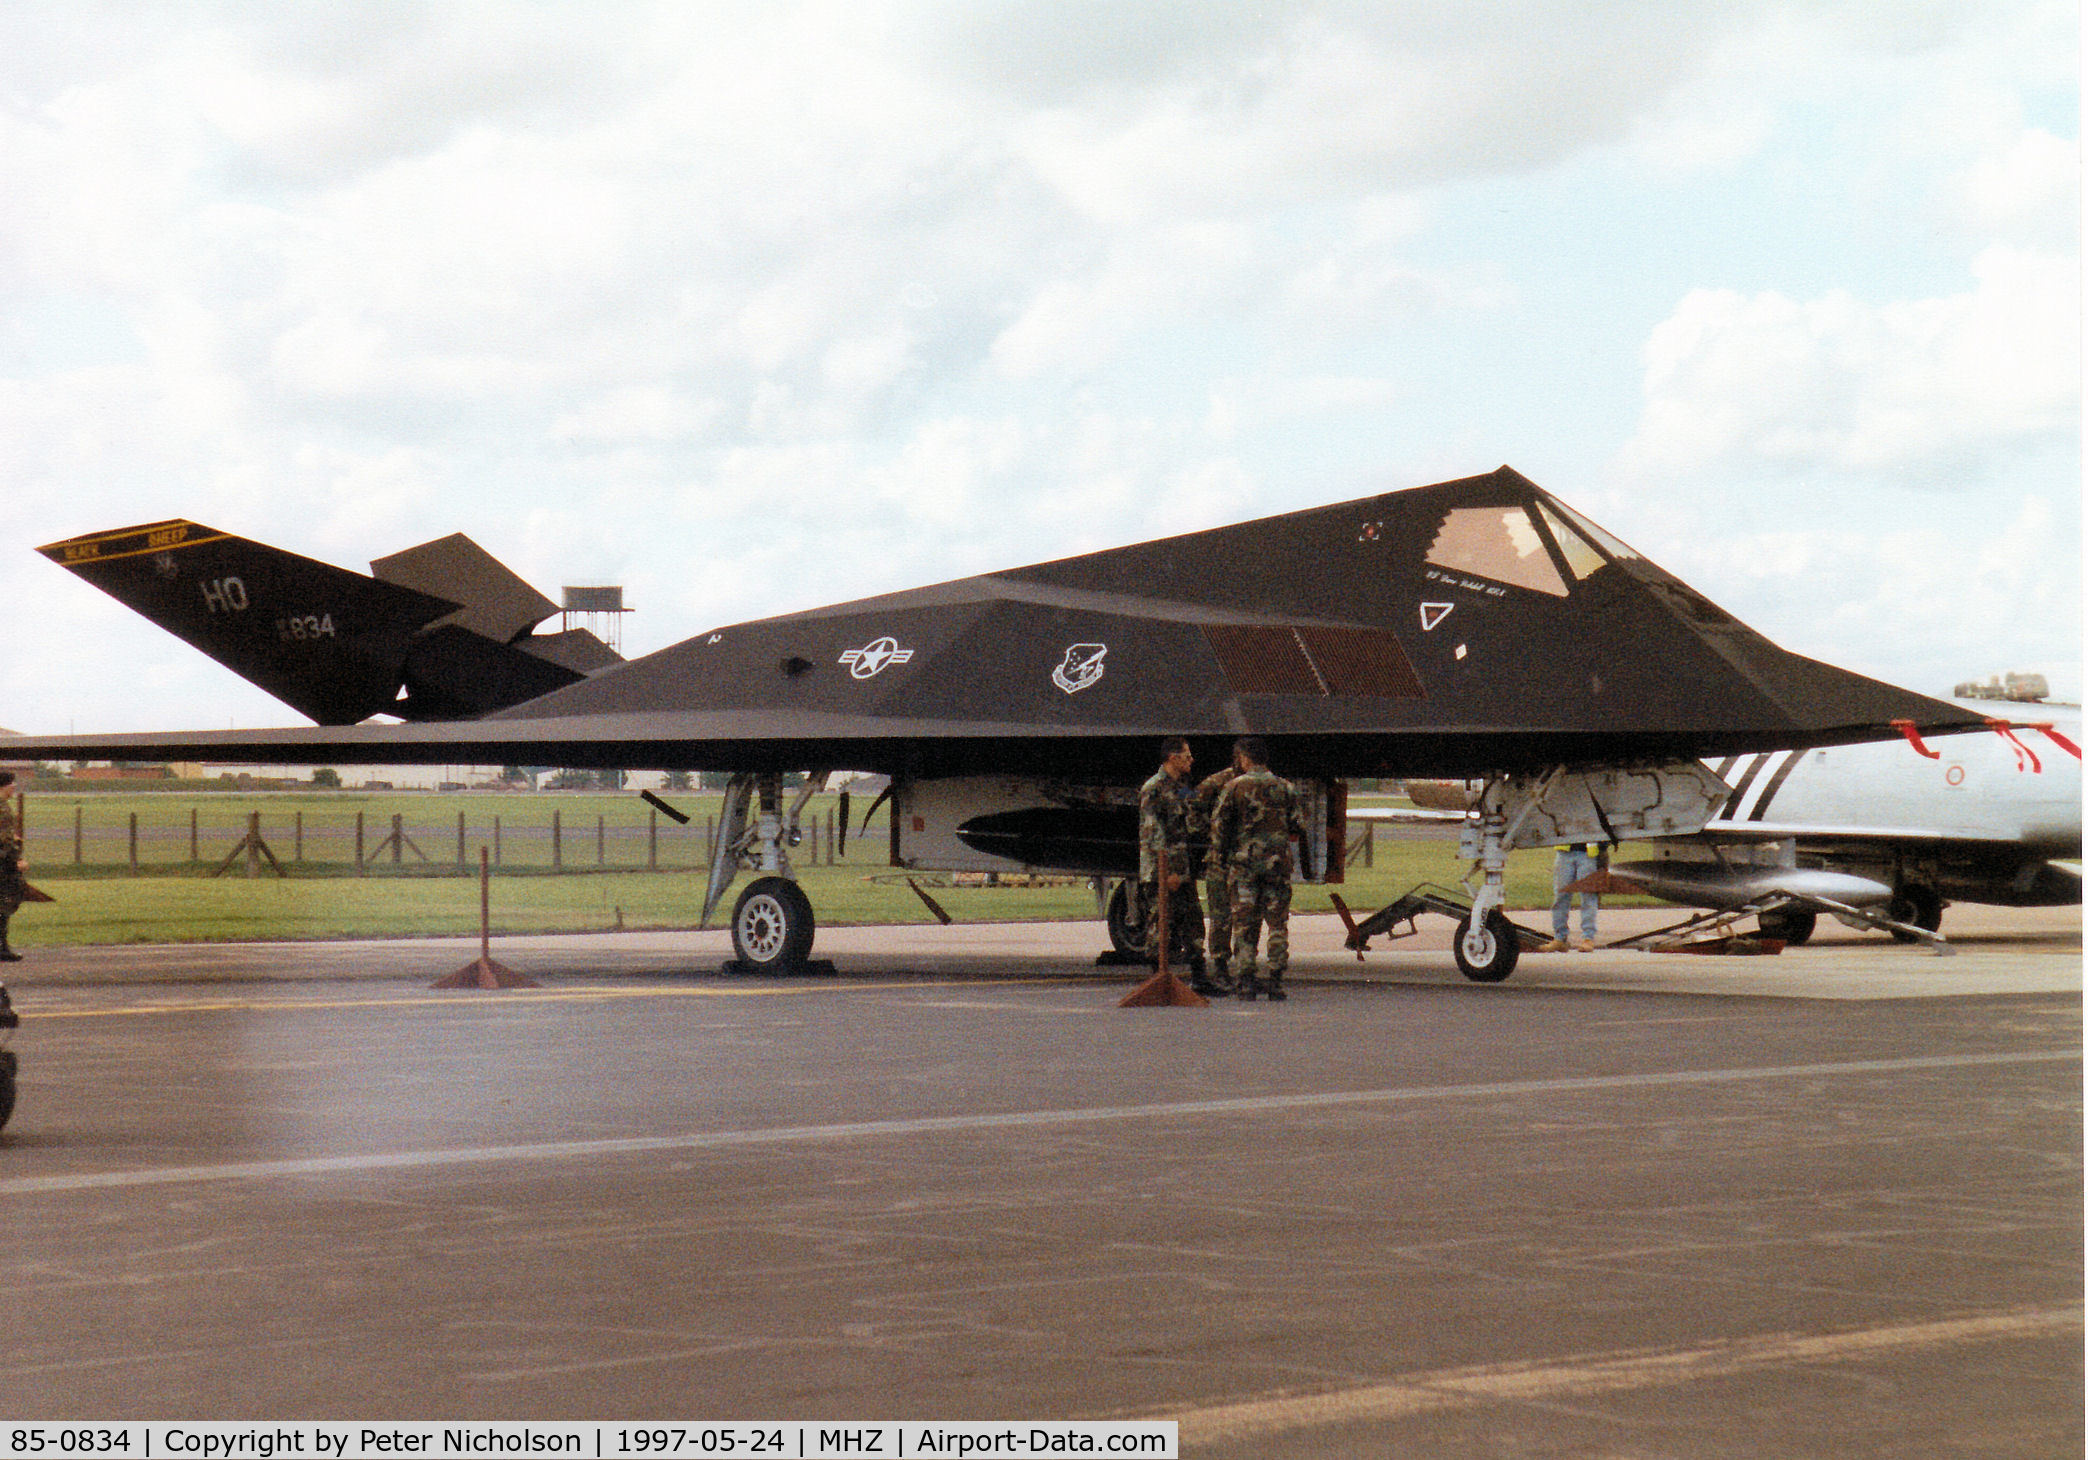 85-0834, 1985 Lockheed F-117A Nighthawk C/N A4056, F-117A Nighthawk, callsign Trend 72, of 8th Fighter Squadron/49th Fighter Wing at Holloman AFB on the flight-line at the 1997 RAF Mildenhall Air Fete.